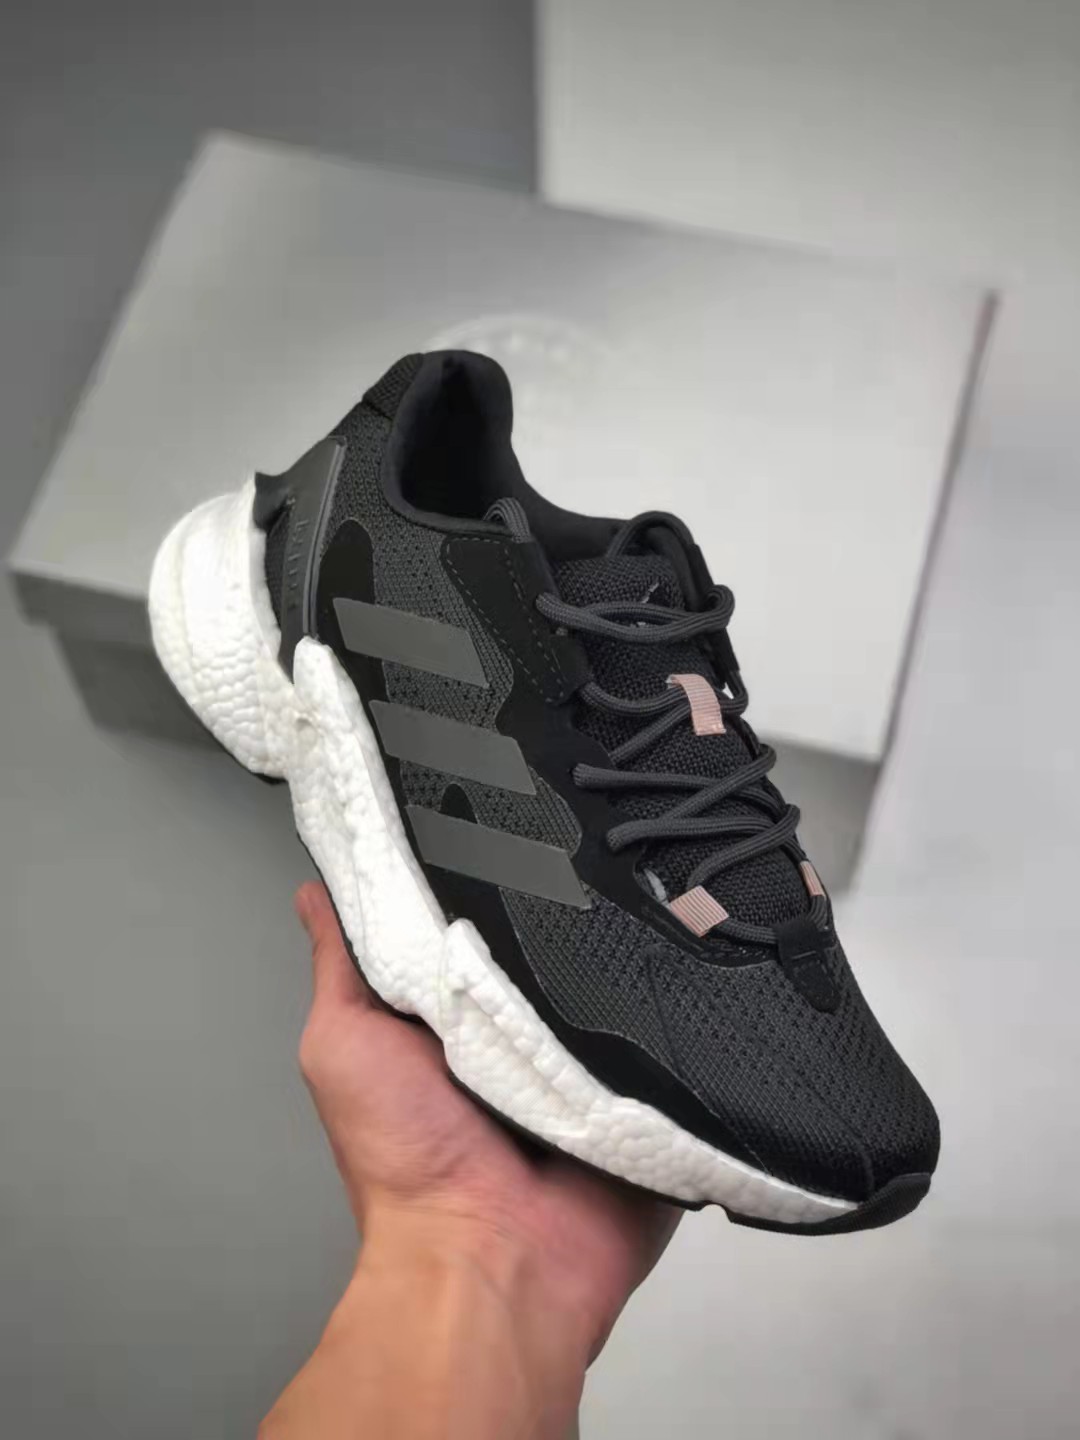 Adidas X9000l4 Black S23673 - Stylish and Comfortable Sneakers